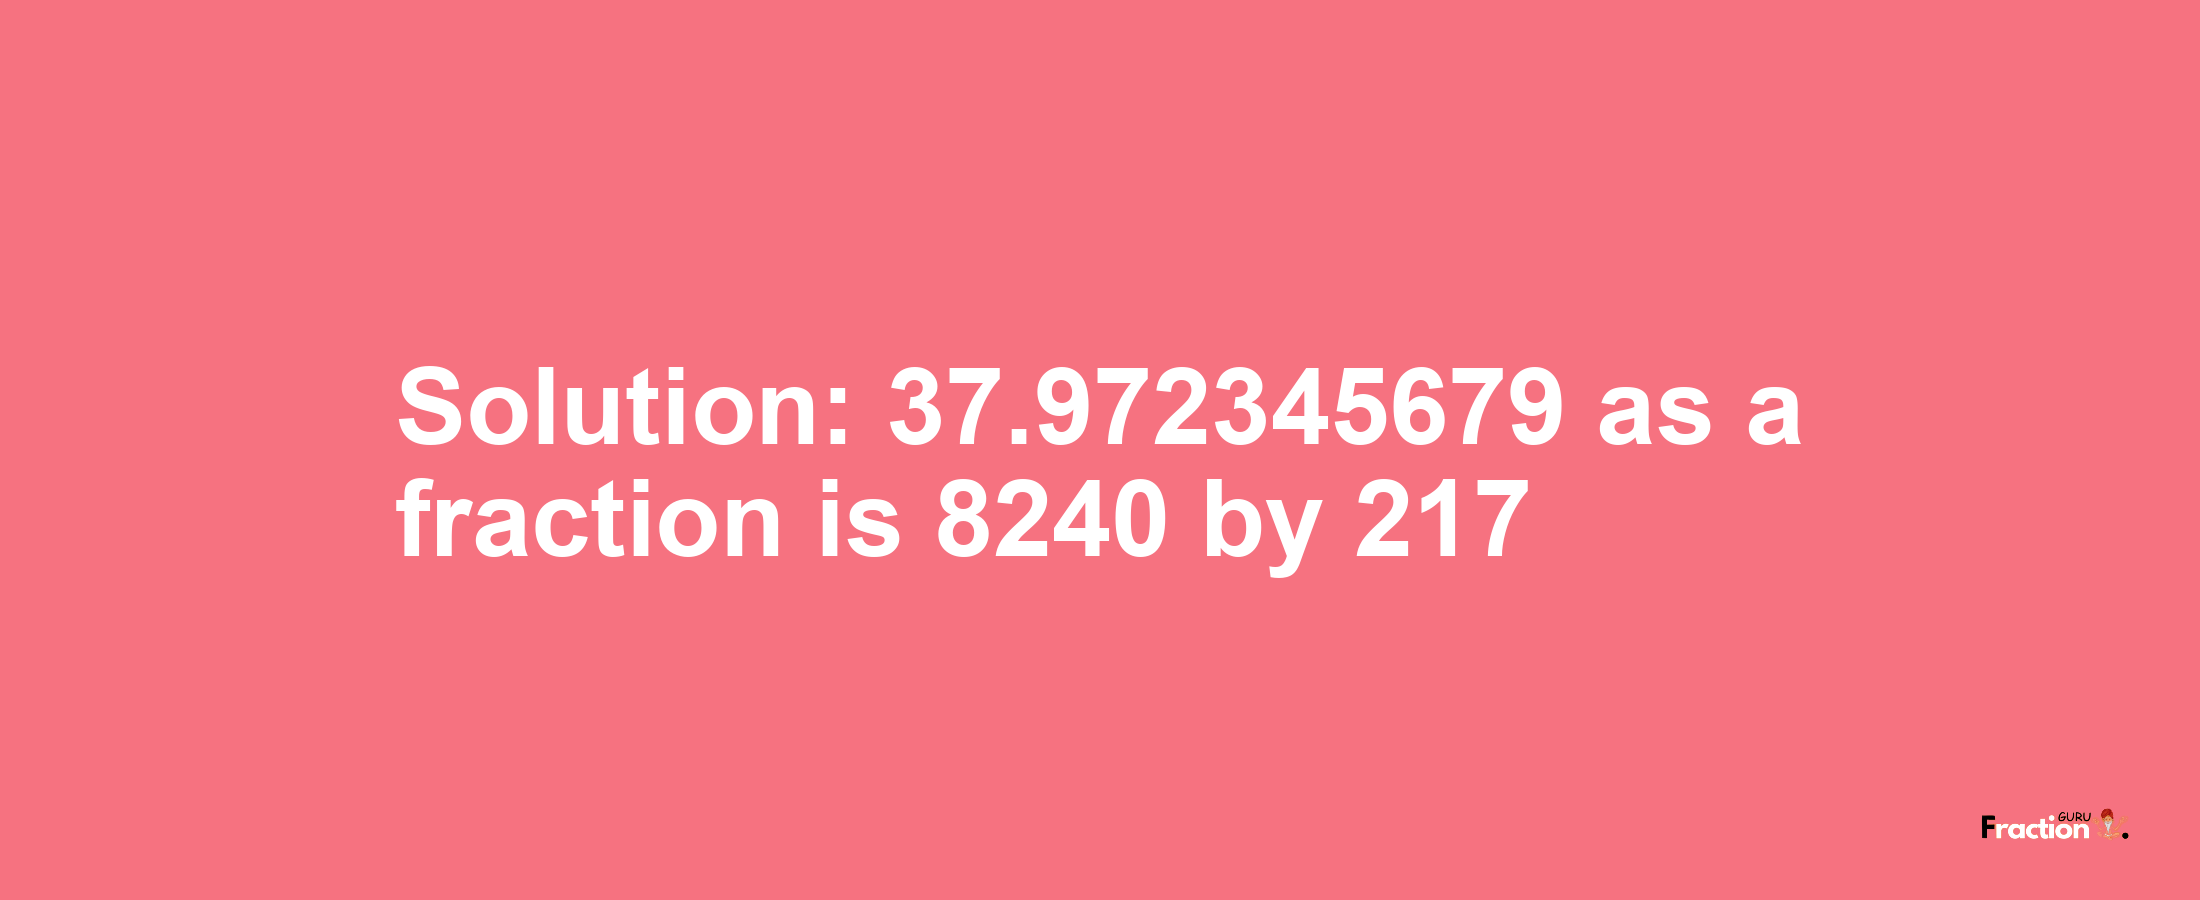 Solution:37.972345679 as a fraction is 8240/217